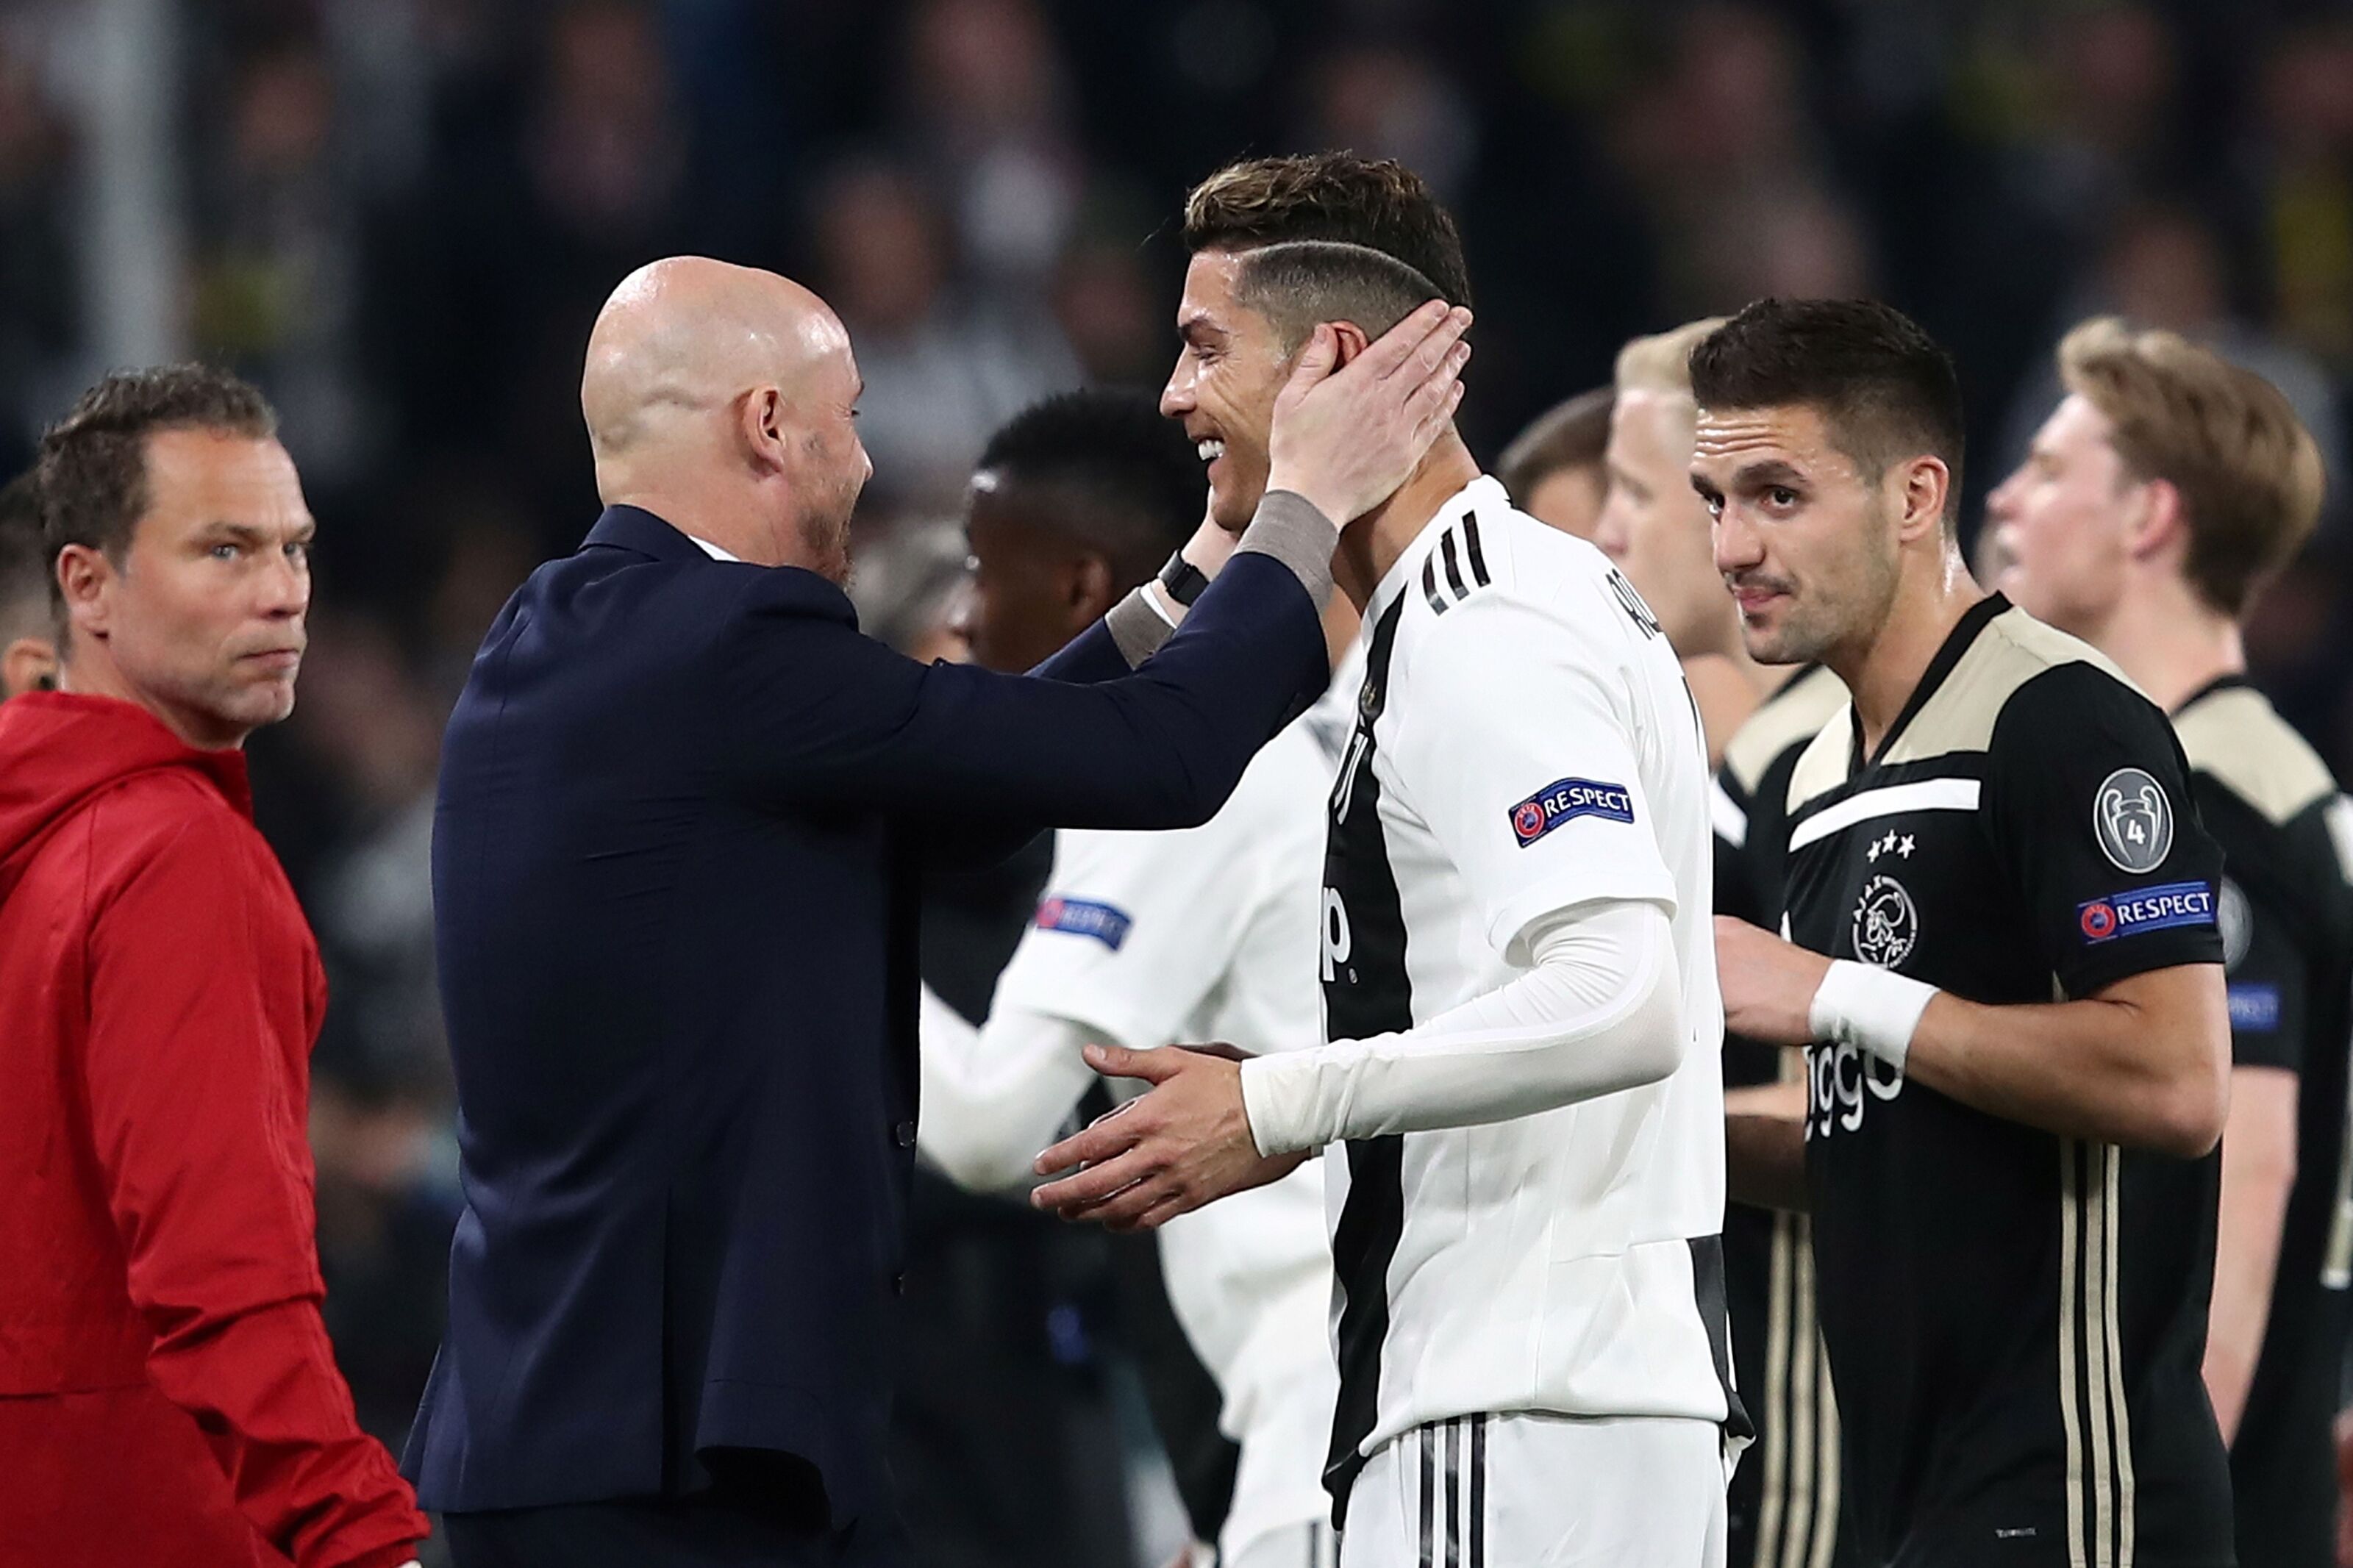 Manchester United: "Manchester will be back where they belong" under Erik ten Hag, claims Cristiano Ronaldo - Check Full Video